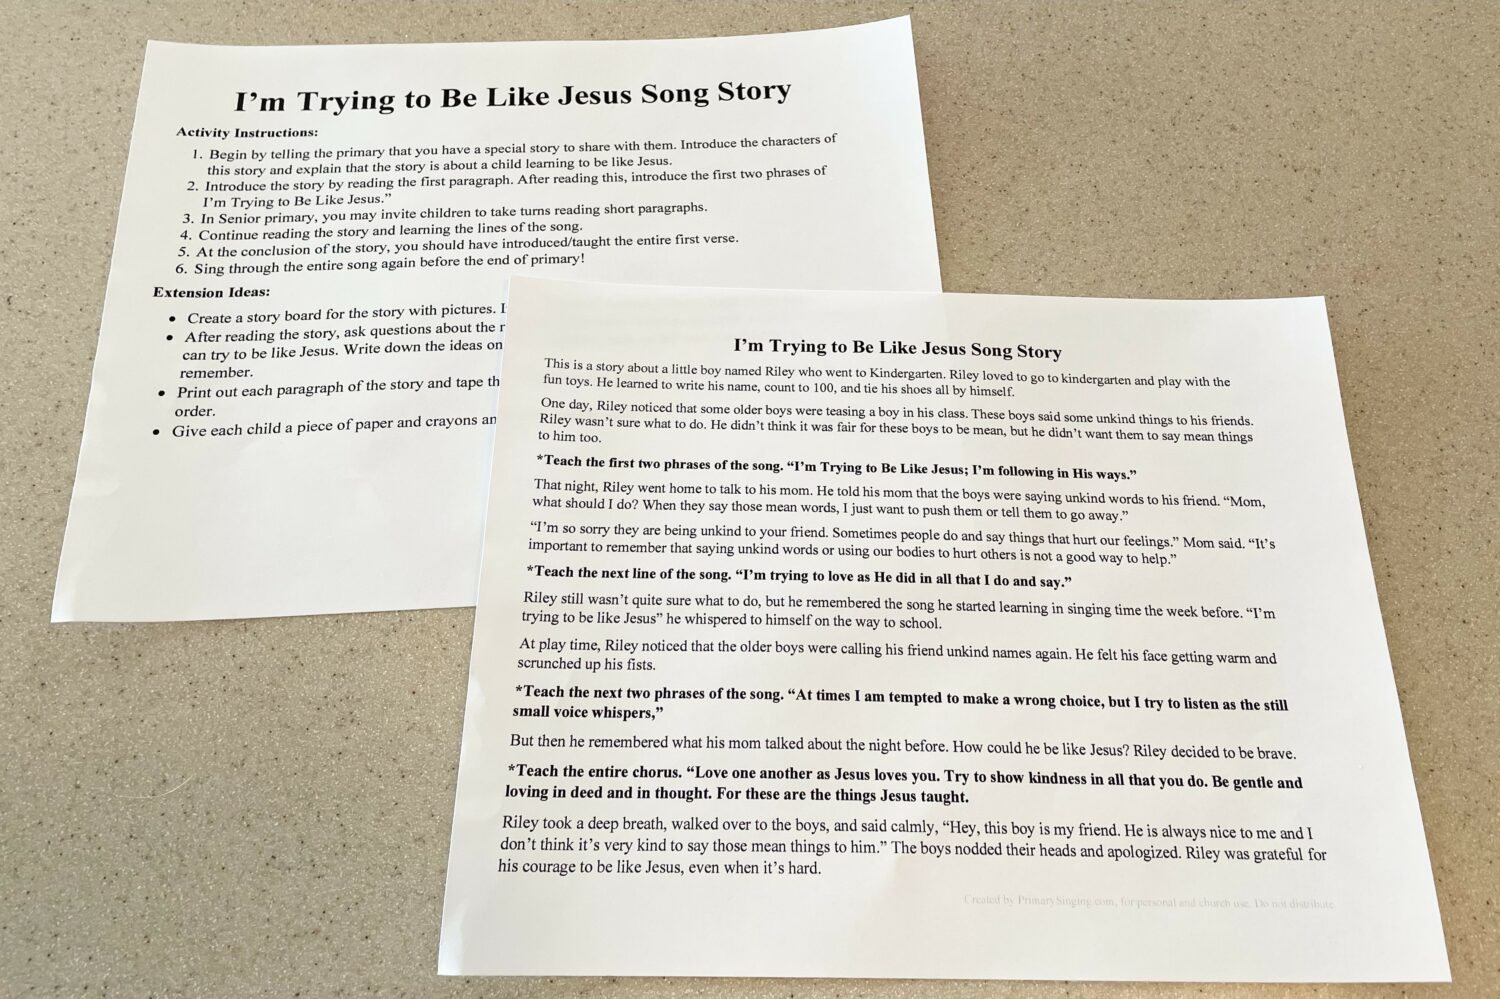 I'm Trying to Be Like Jesus Song Story Singing time ideas for Primary Music Leaders IMG 6644 e1654984317738